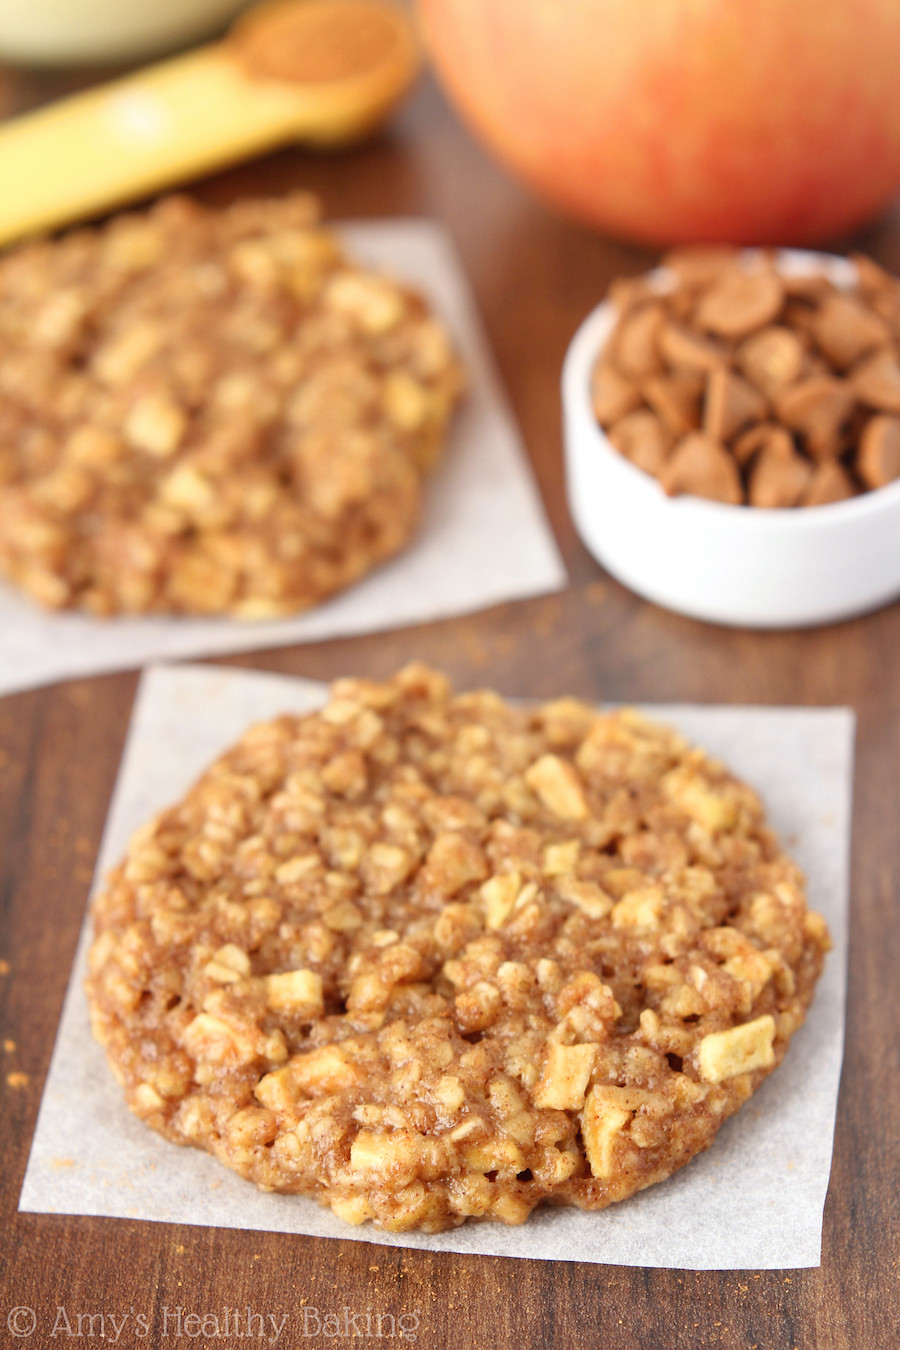 Recipes For Oatmeal Cookies
 Apple Pie Oatmeal Cookies Recipe Video 